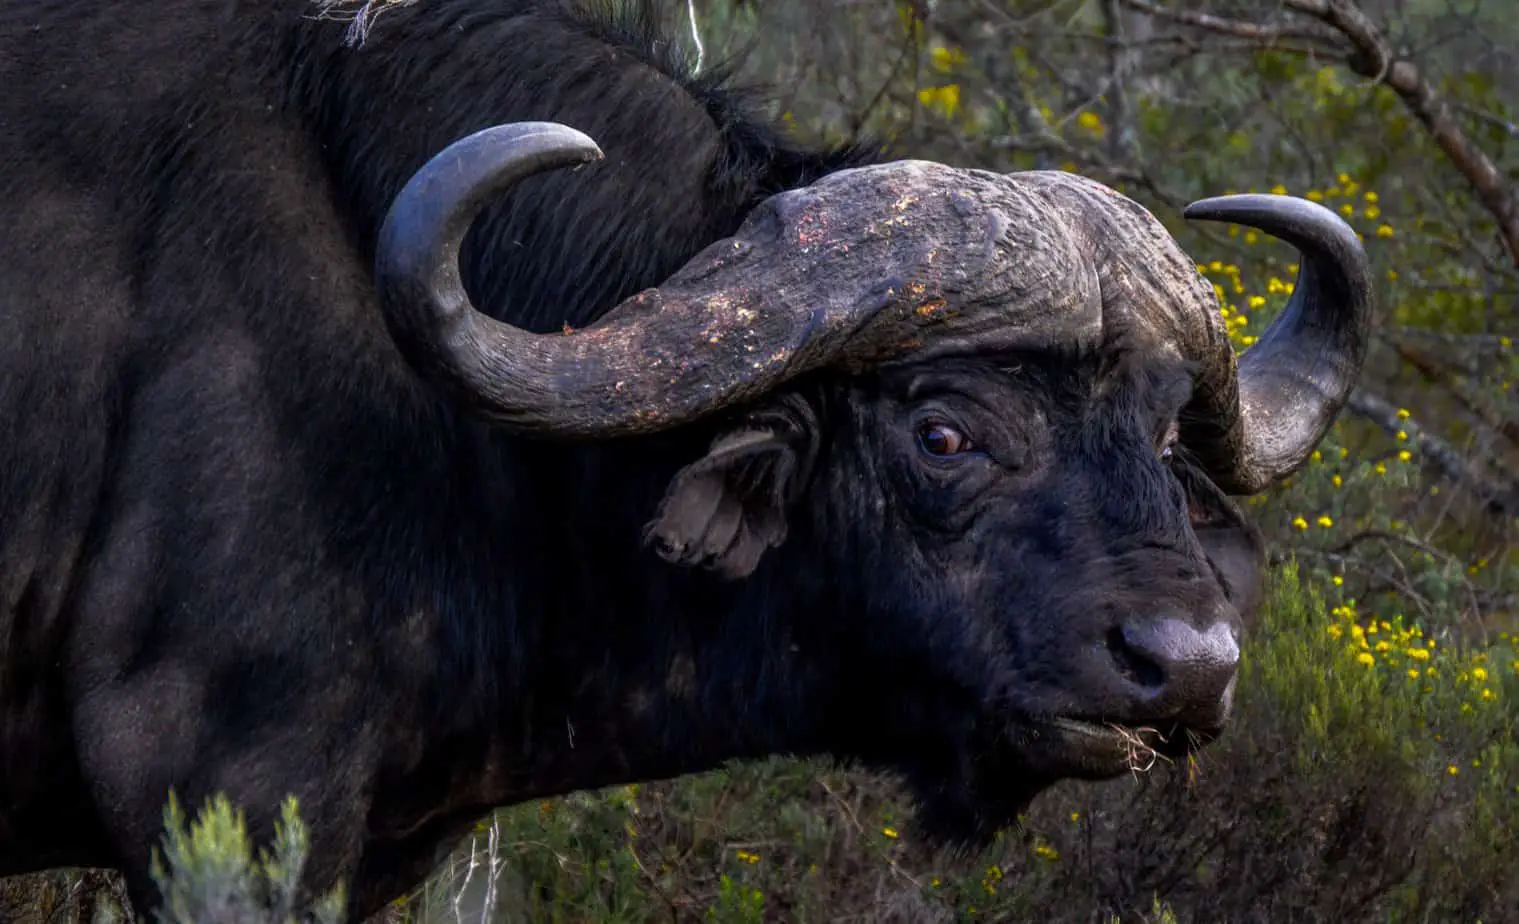 Working With The Buffalo